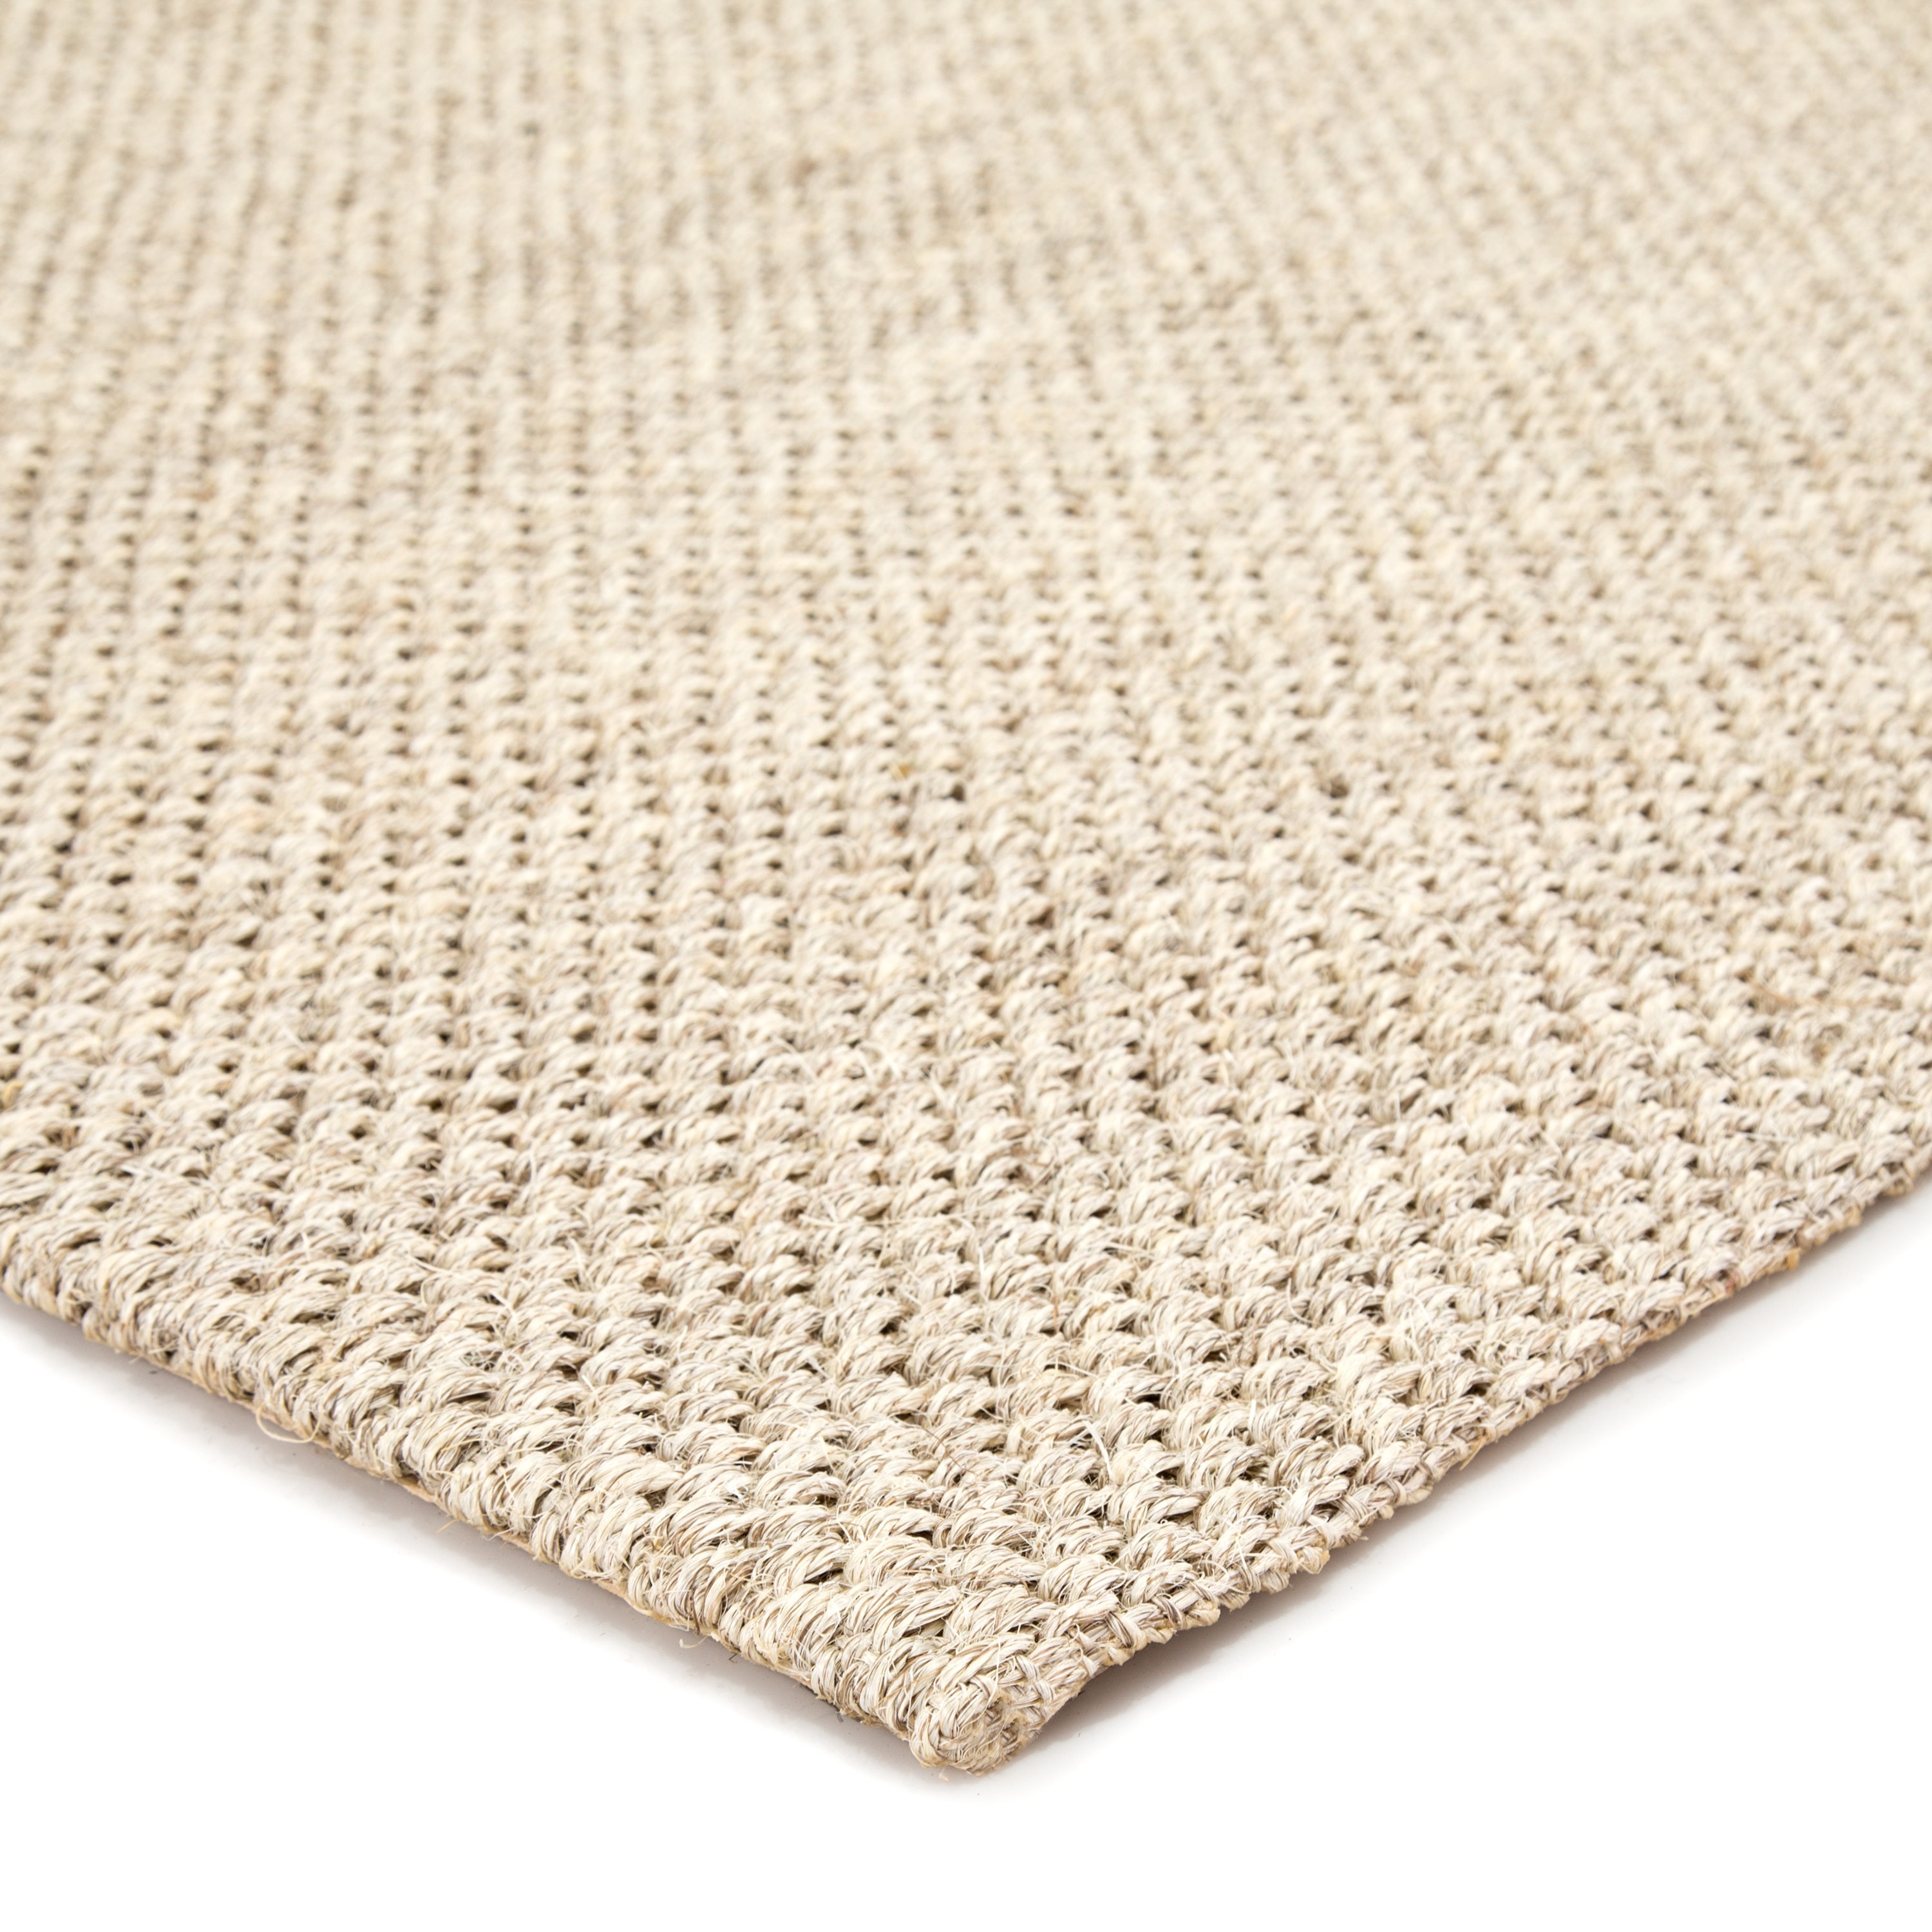 Naples Natural Solid White/ Taupe Area Rug (9' X 12') - Image 1